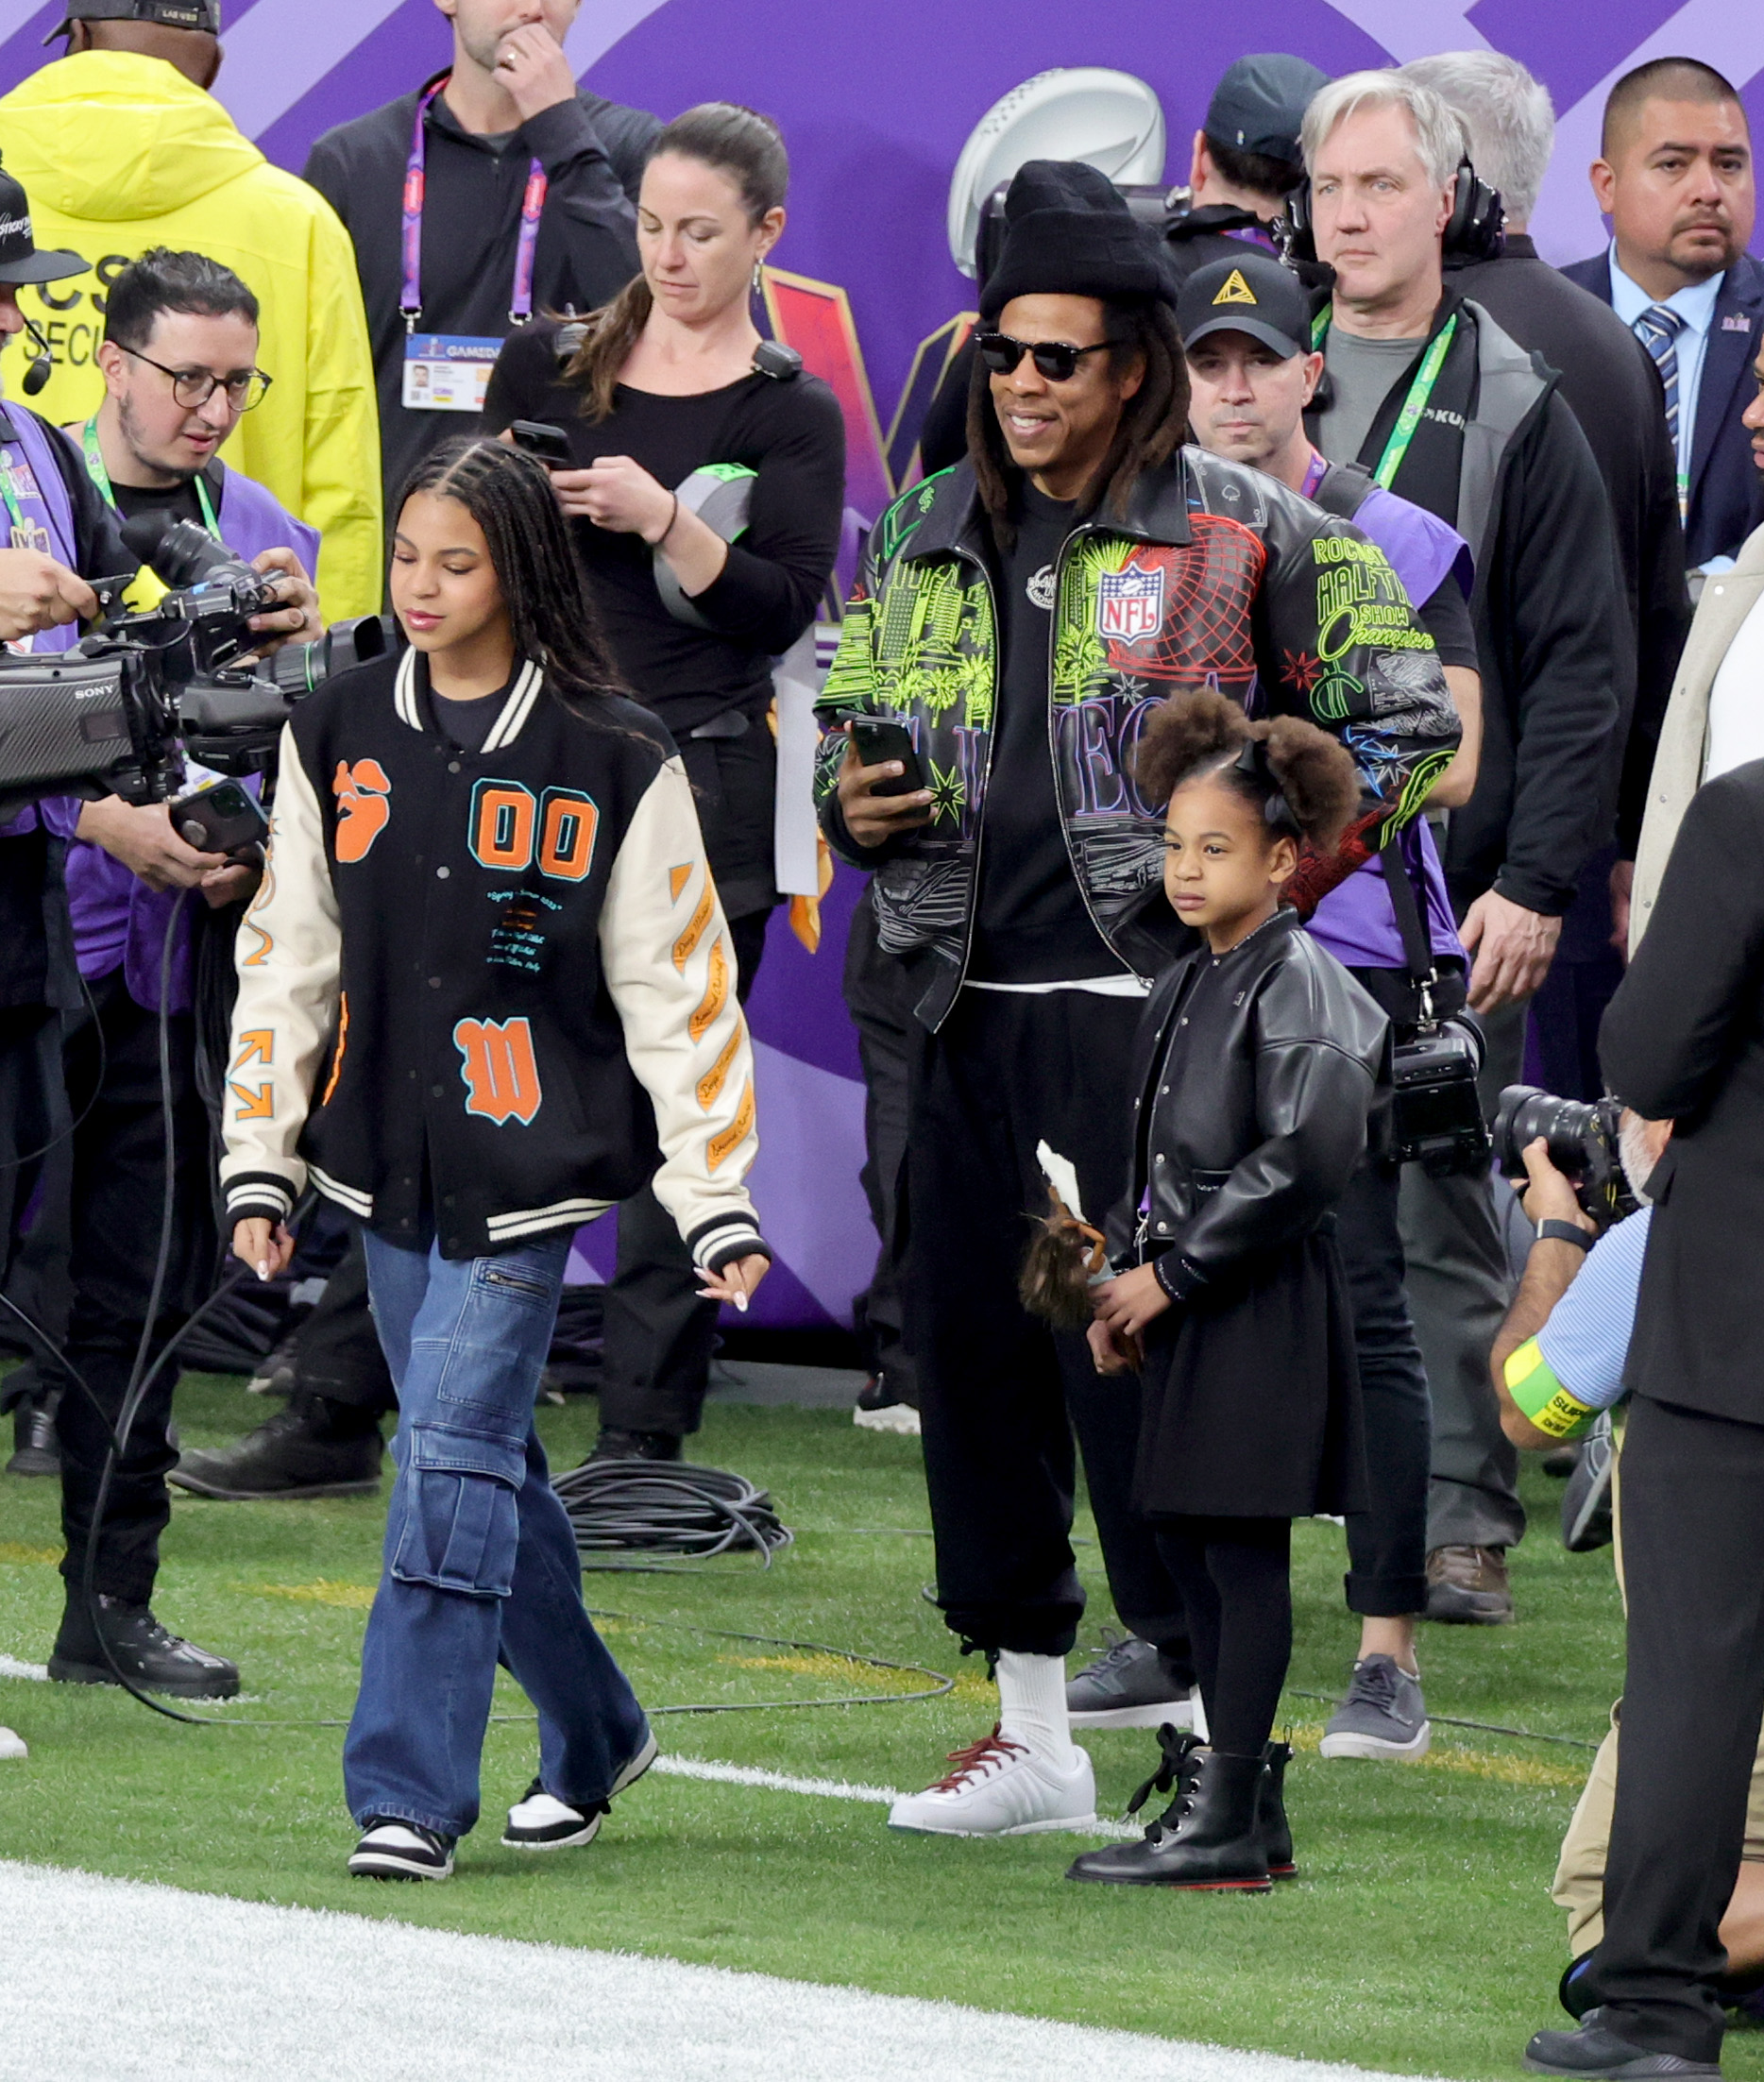 Jay-Z attended the Super Bowl with his daughters Blue Ivy and Rumi